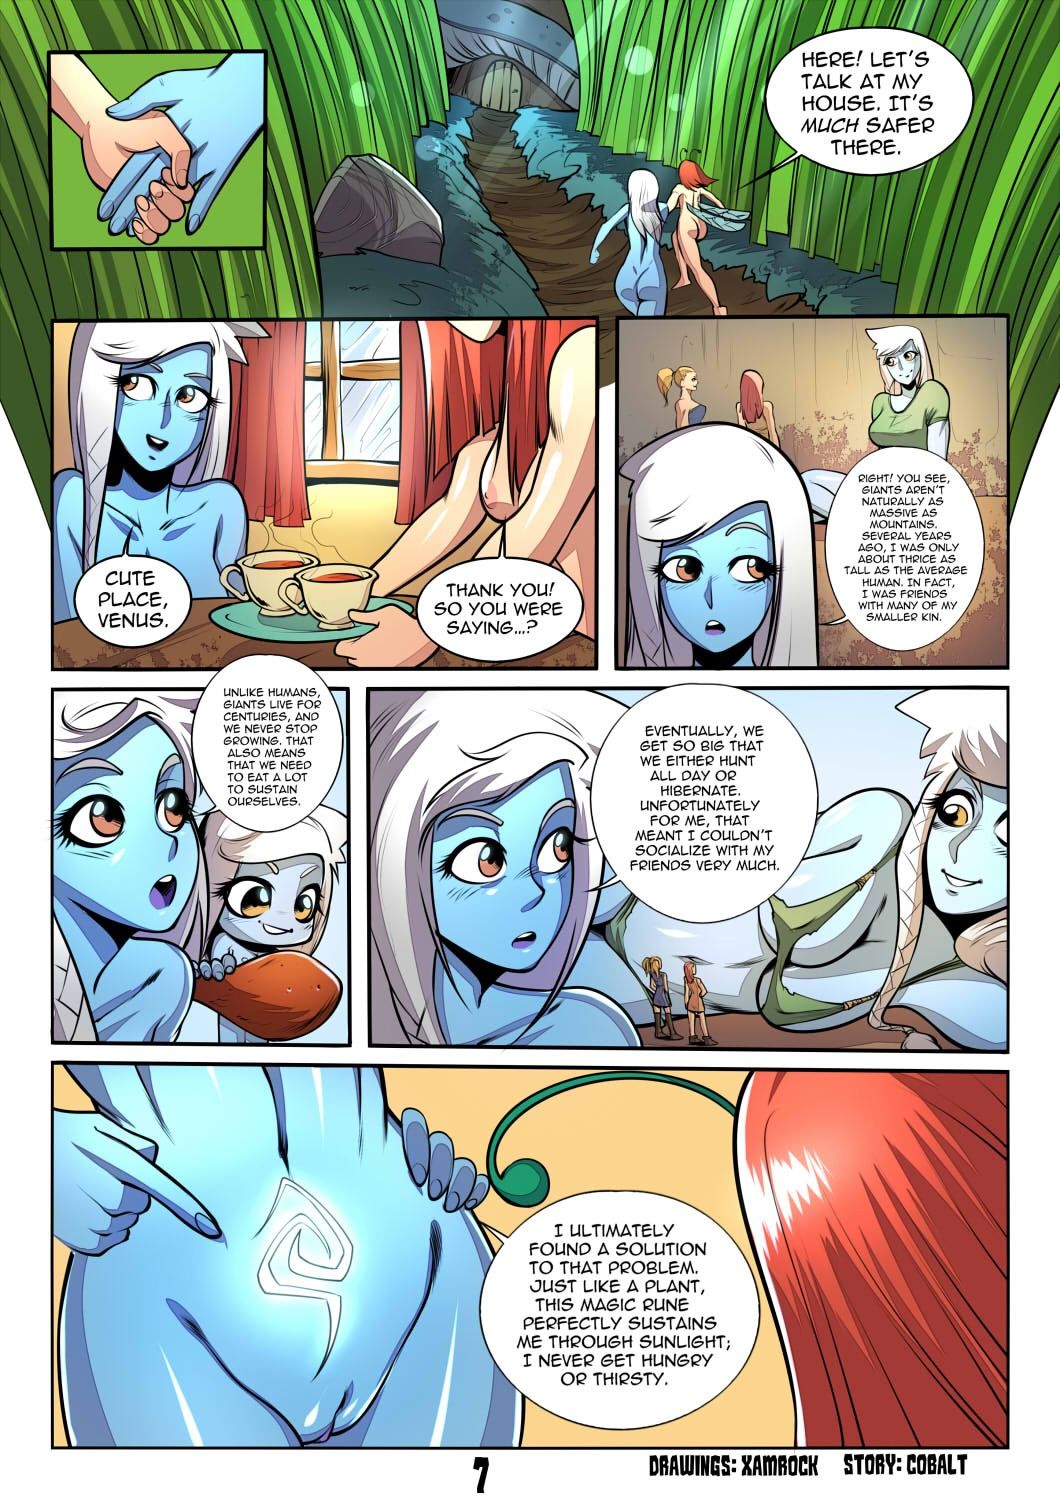 From High Above by Xamrock page 8